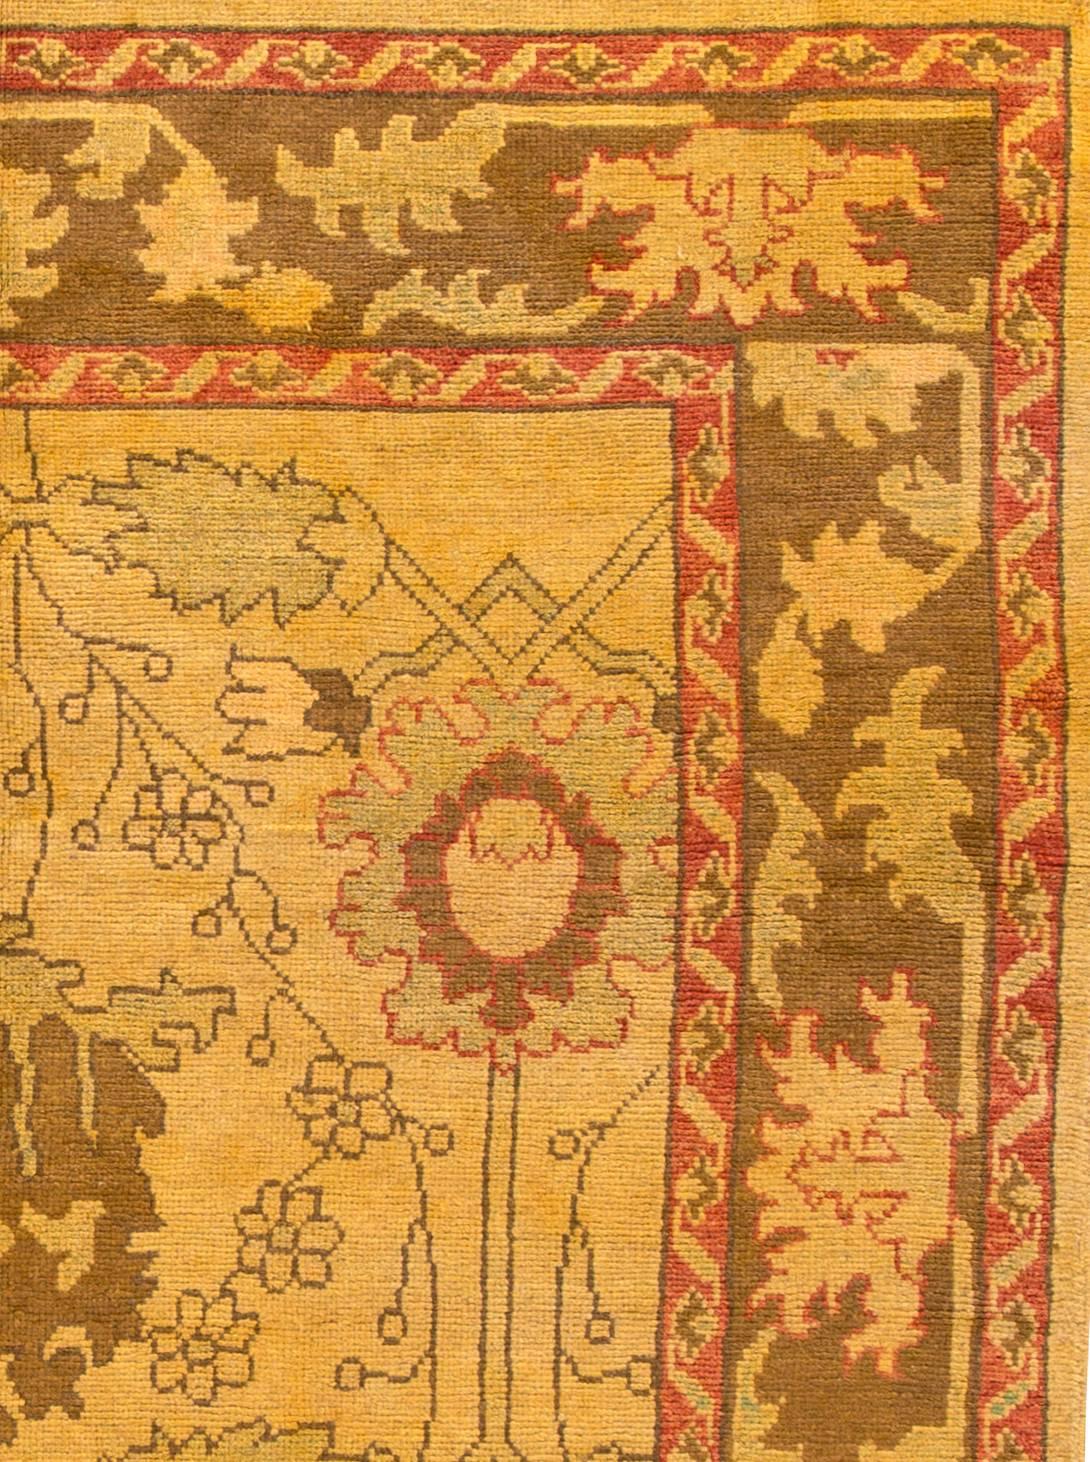 Persian Highly Contrasted Vintage Beige Oushak-Style Rug, 7.11x10.09 For Sale